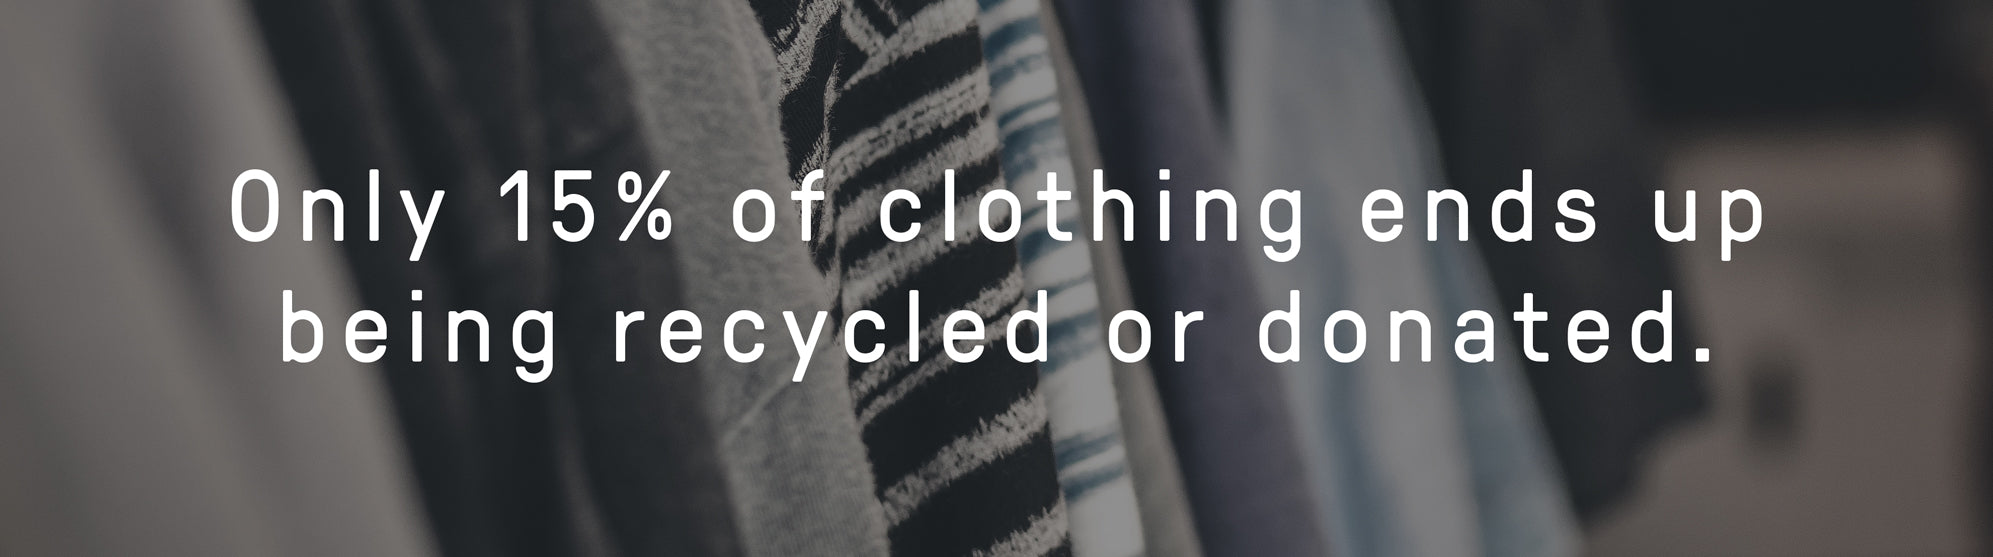 Only 15% of clothing ends up being recycled or donated. 